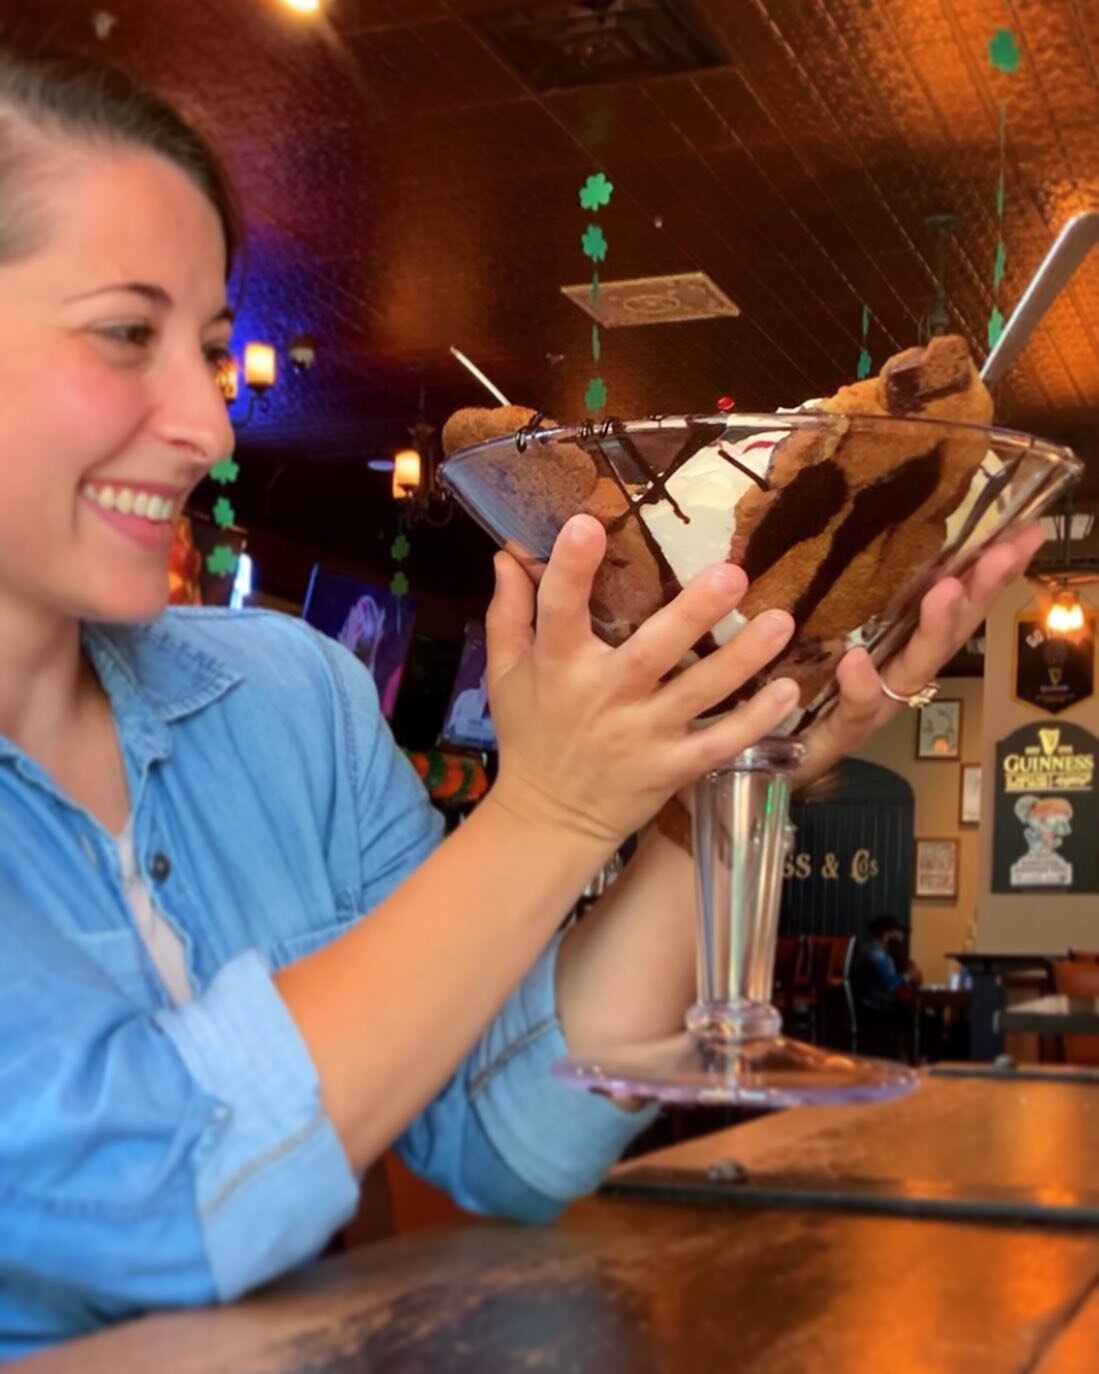 Get you someone who looks at you the way we look at this GIANT Cookie-Tini! 😍

#cookies #cookiesundae #chocolatechipcookies #freshbakedcookies #sundae #sweettooth #timefordessert #pubfood #publife #irishpub #luckoftheirish #dinein #takeout #delivery